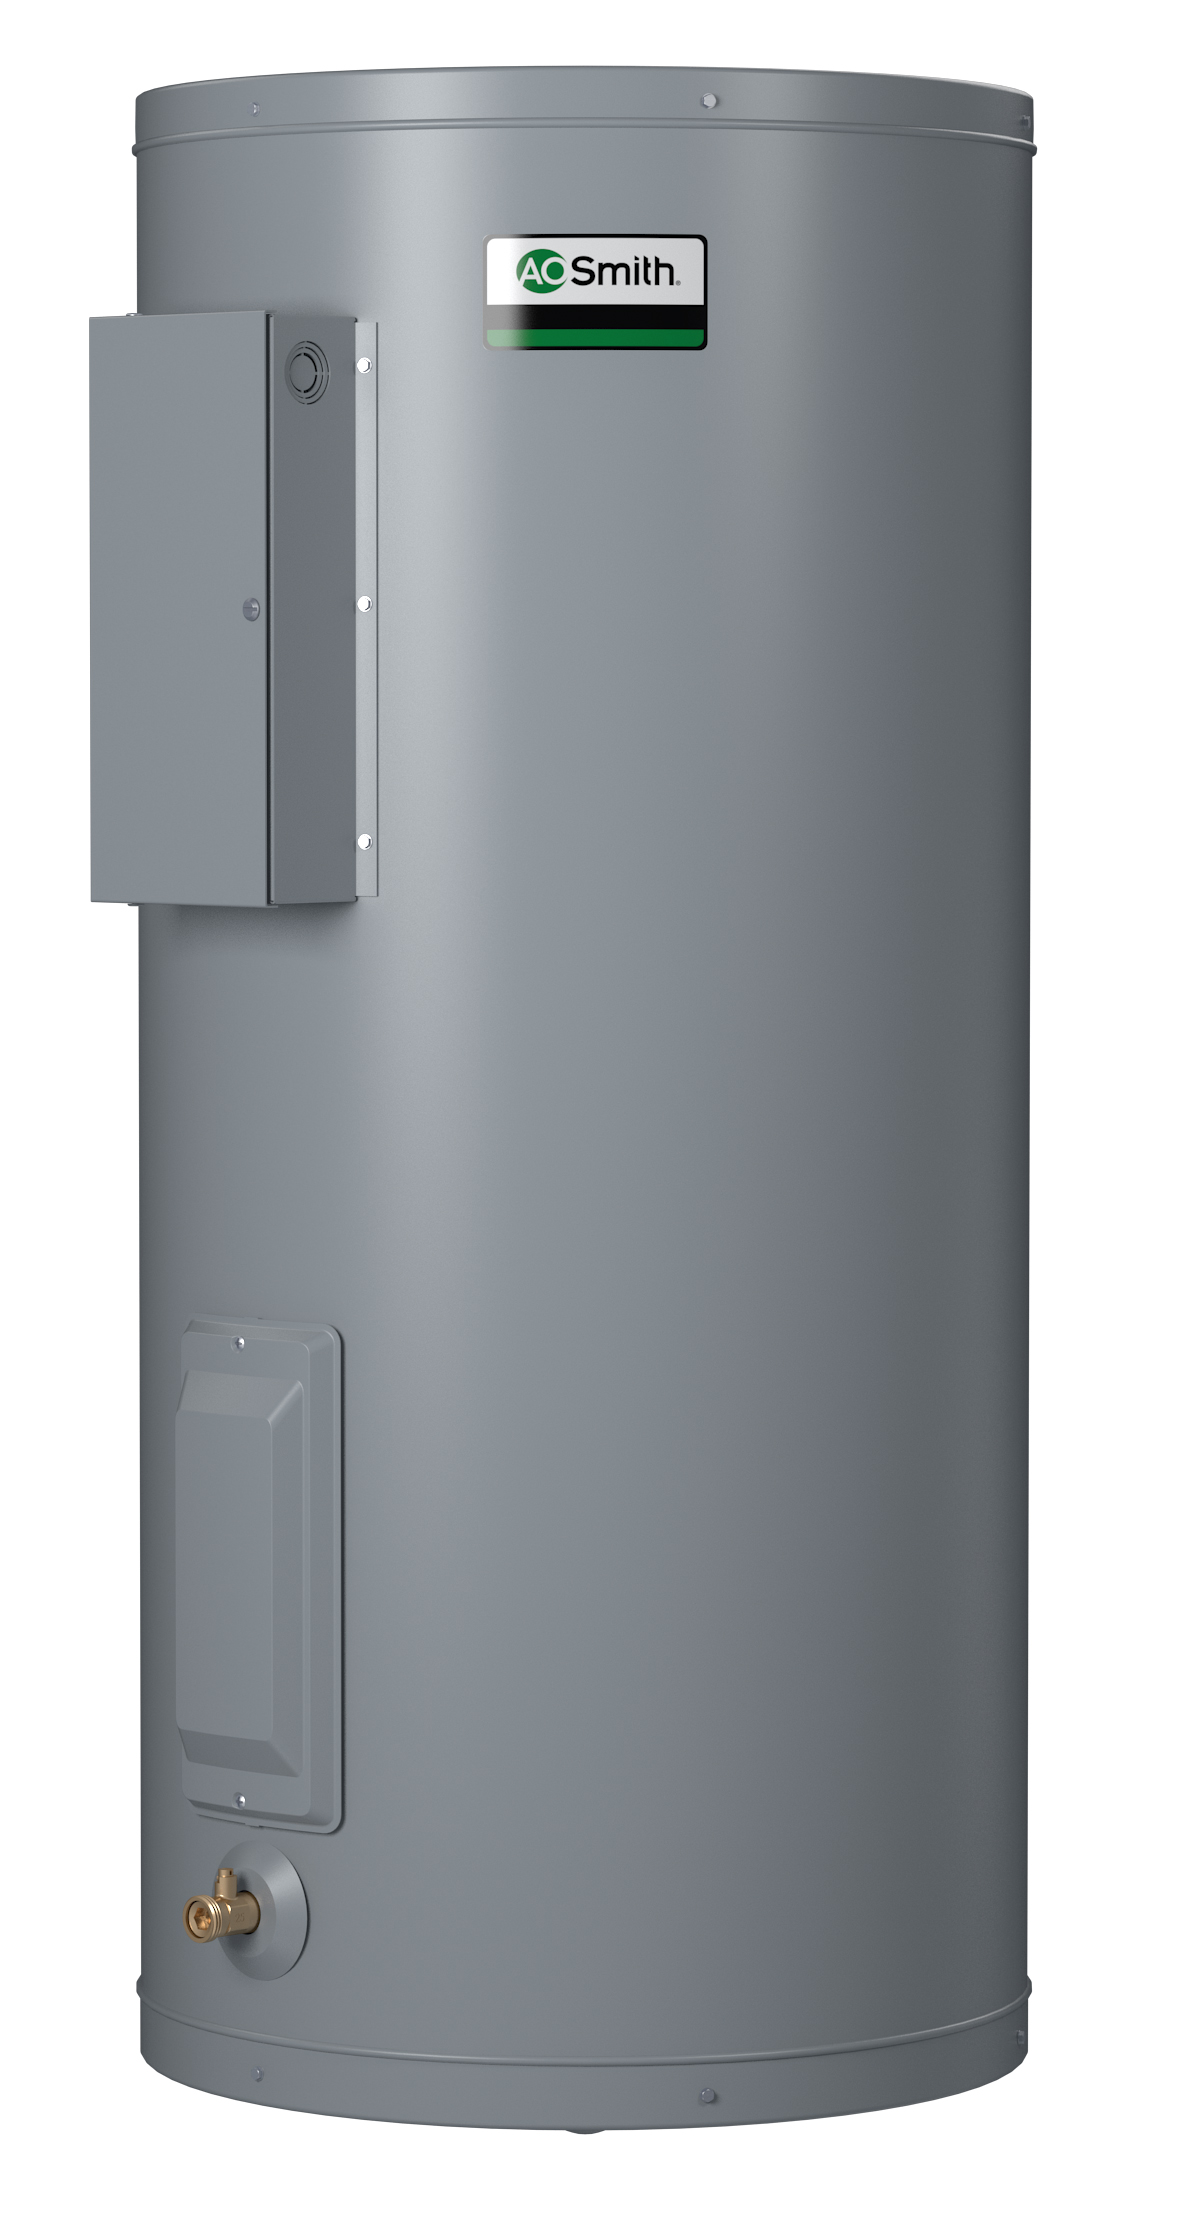 AO SMITH DEN-120D: 120 GALLONS, 12.2KW, 277 VOLT, 1 PHASE, (2-6100 WATT ELEMENTS, SIMULTANEOUS WIRING), DURA-POWER, LIGHT DUTY COMMERCIAL ELECTRIC WATER HEATER